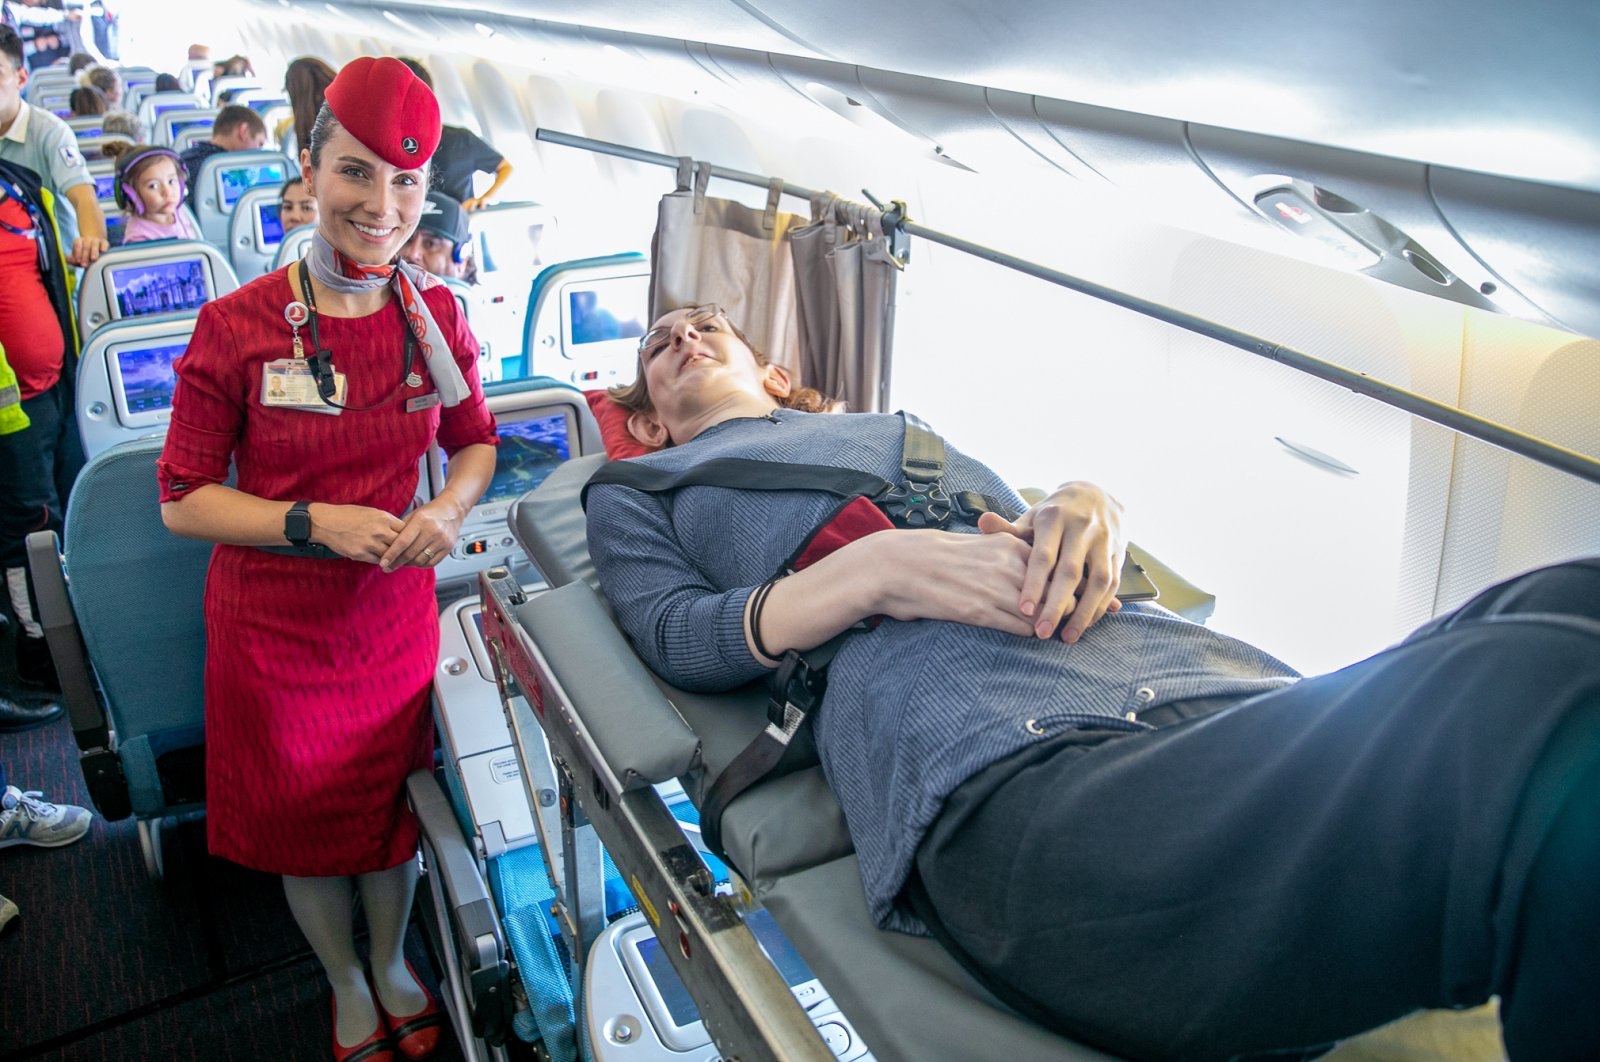 First  Flight  of  the tallest woman in the World ! Turkish Airlines  made  it  by  removing  Six  seats  to make room for her travel to  San Francisco .